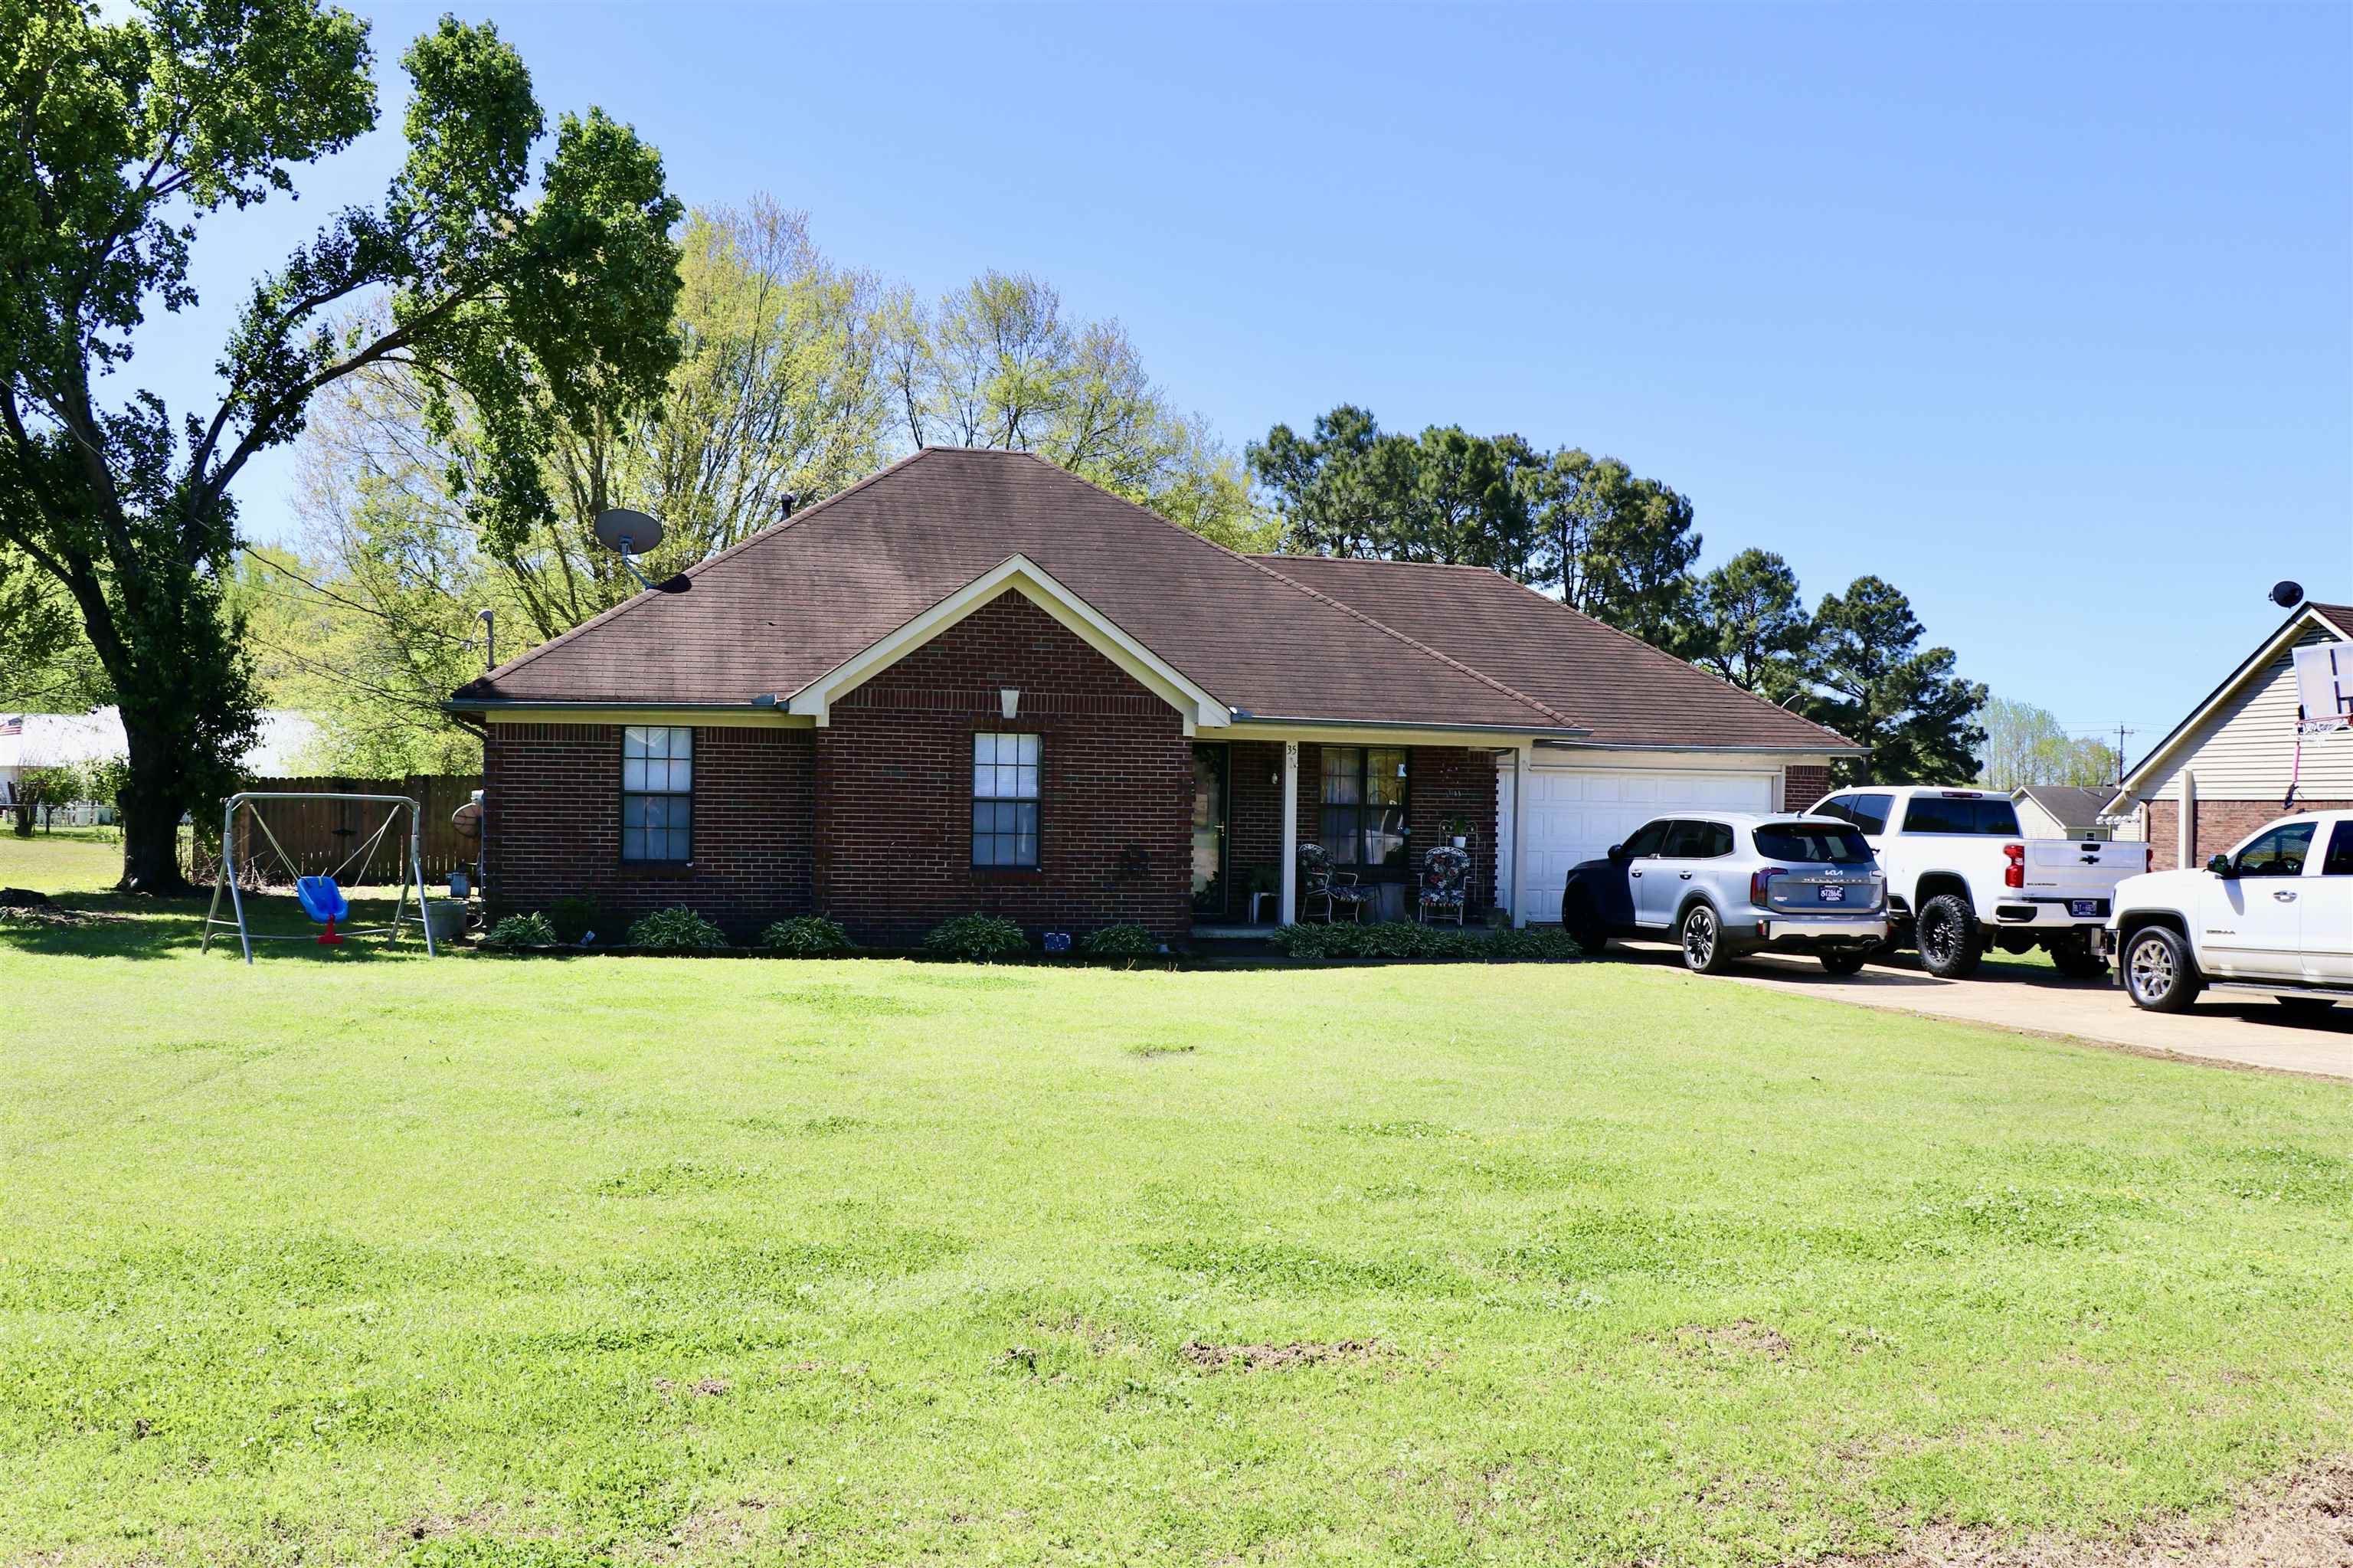 View Unincorporated, TN 38023 house